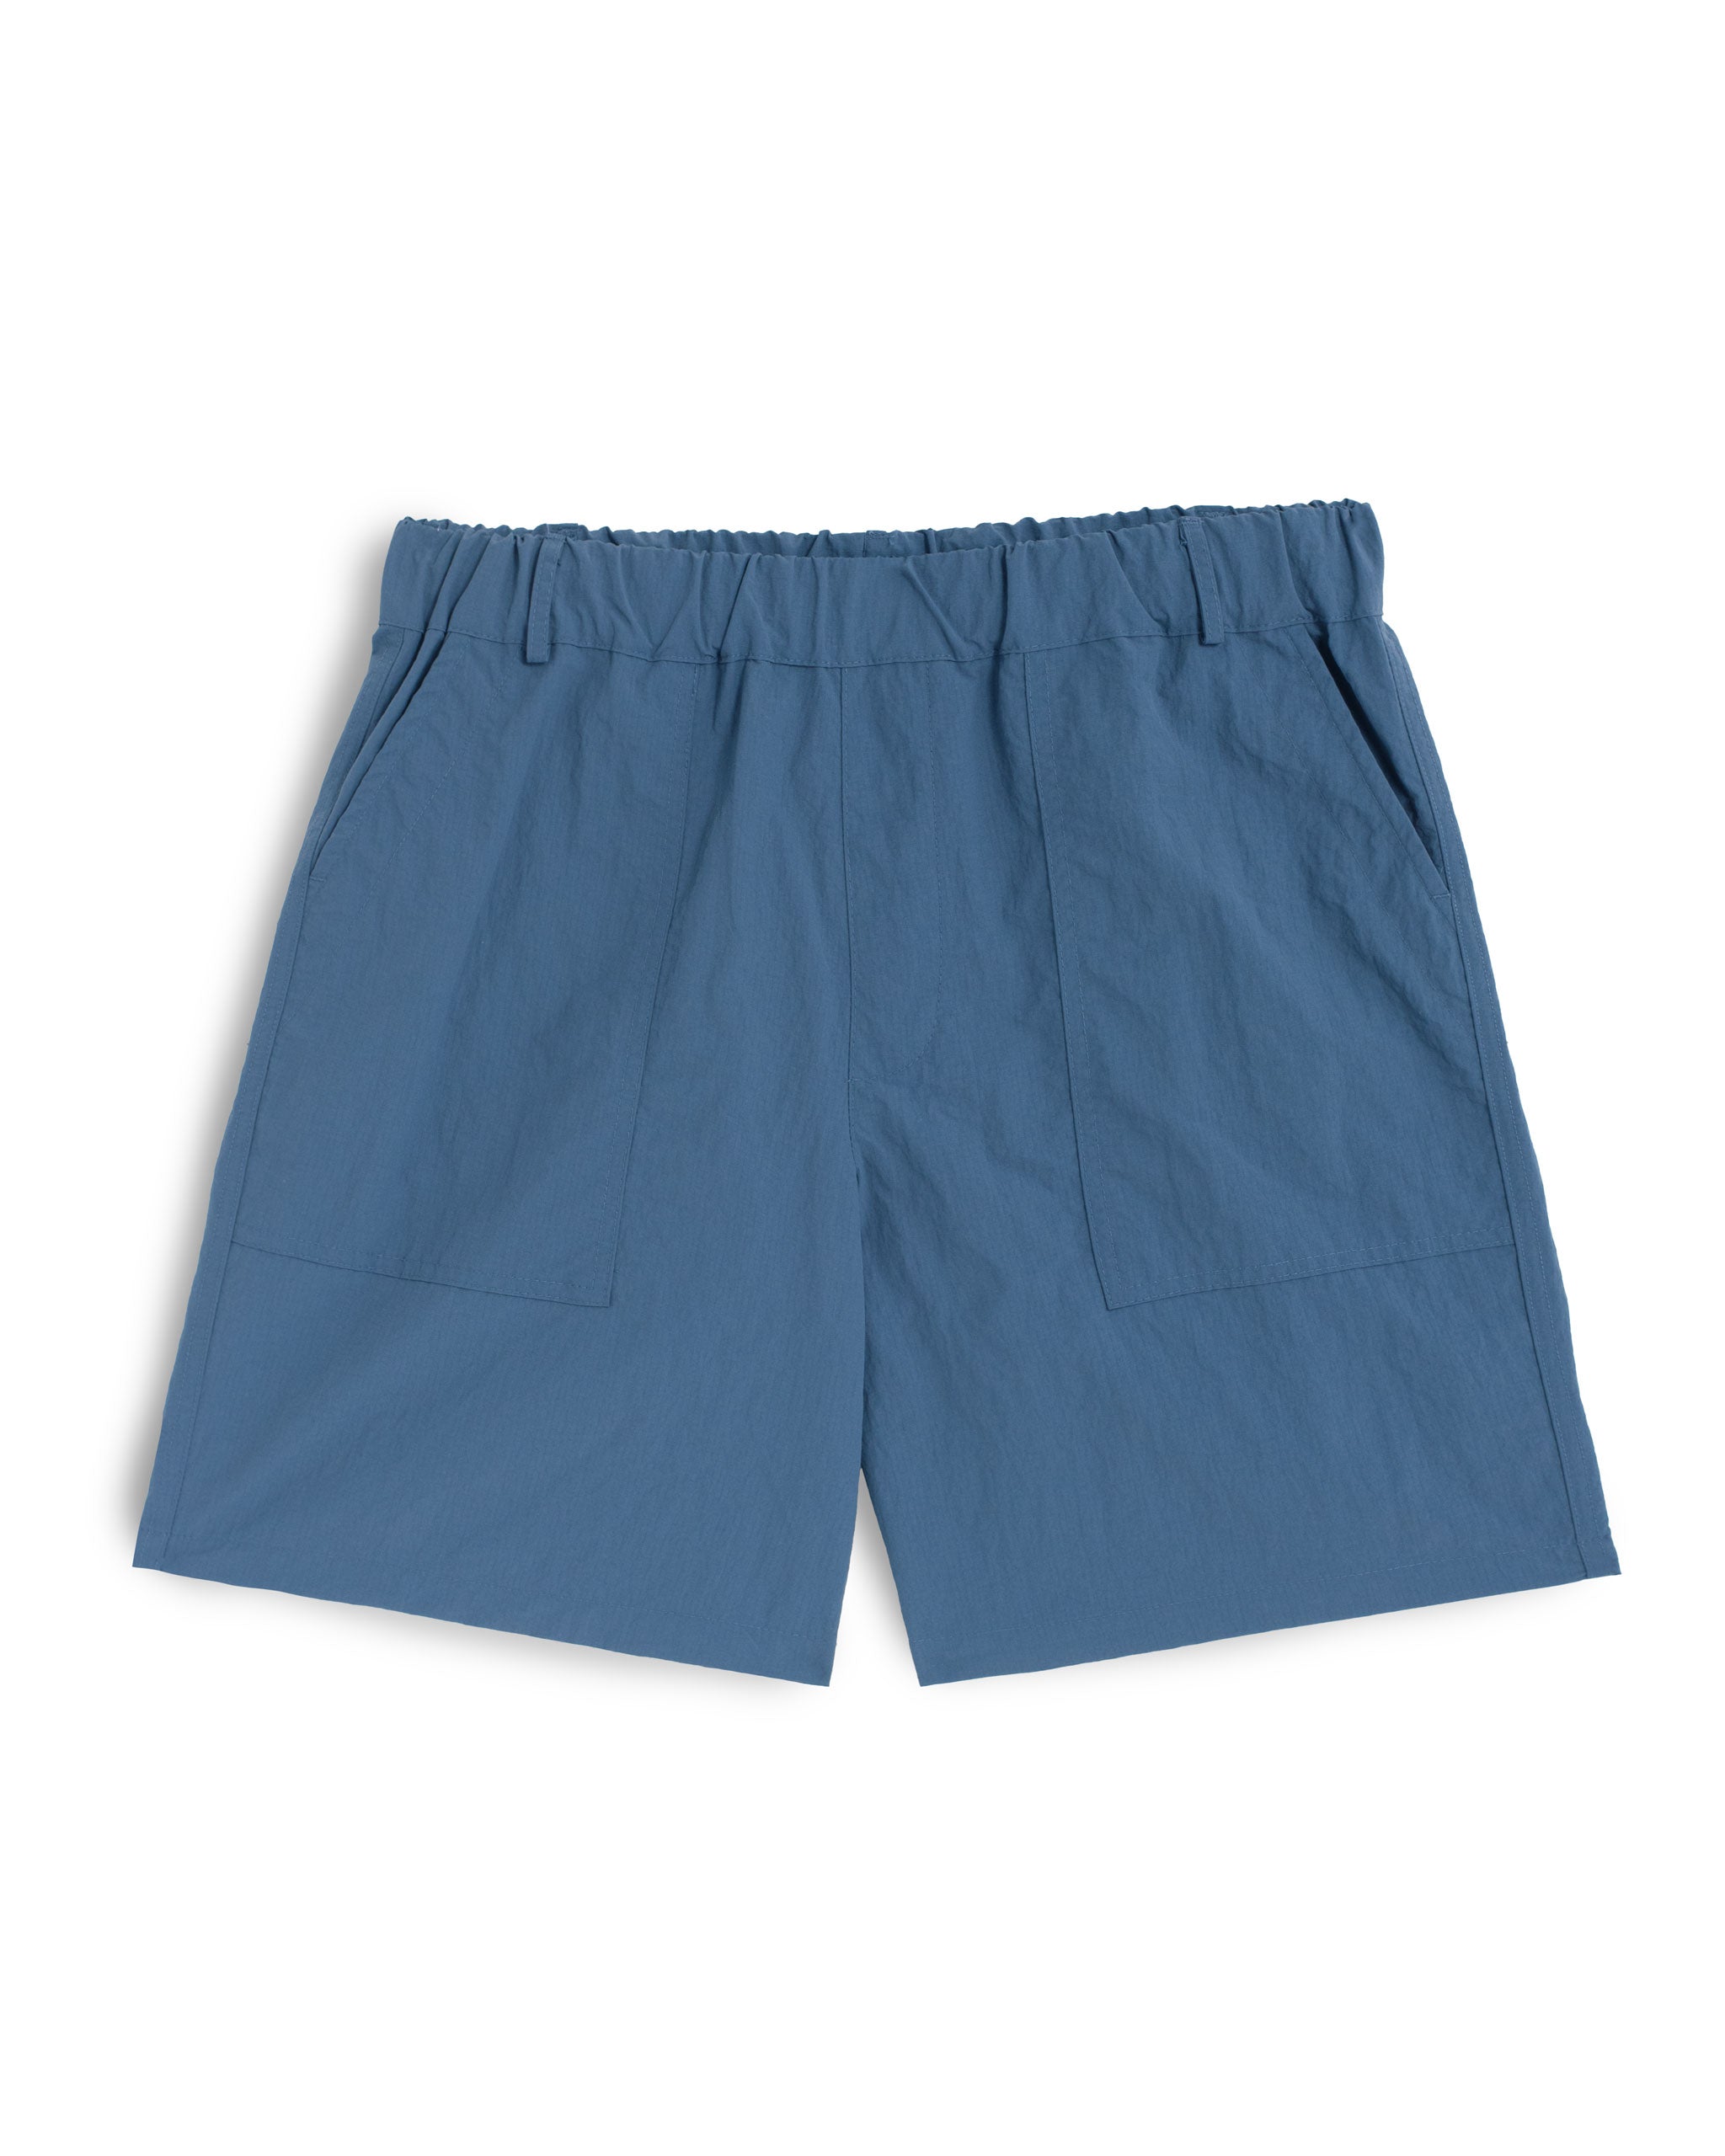 Solid blue utility shorts in ripstop nylon